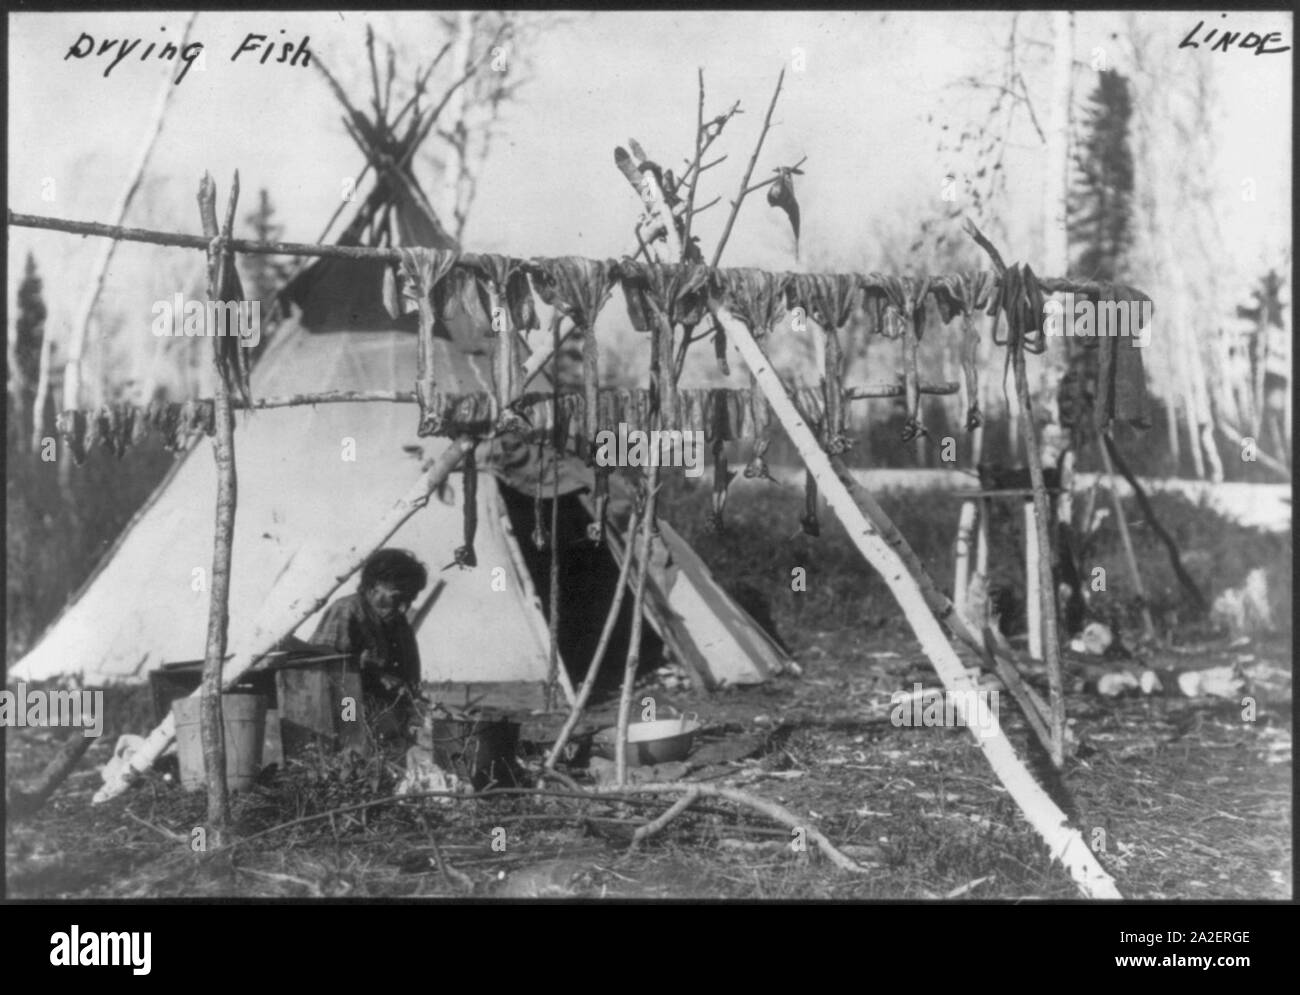 Elderly Indian woman outside teepee, with fish drying on poles in foreground Stock Photo